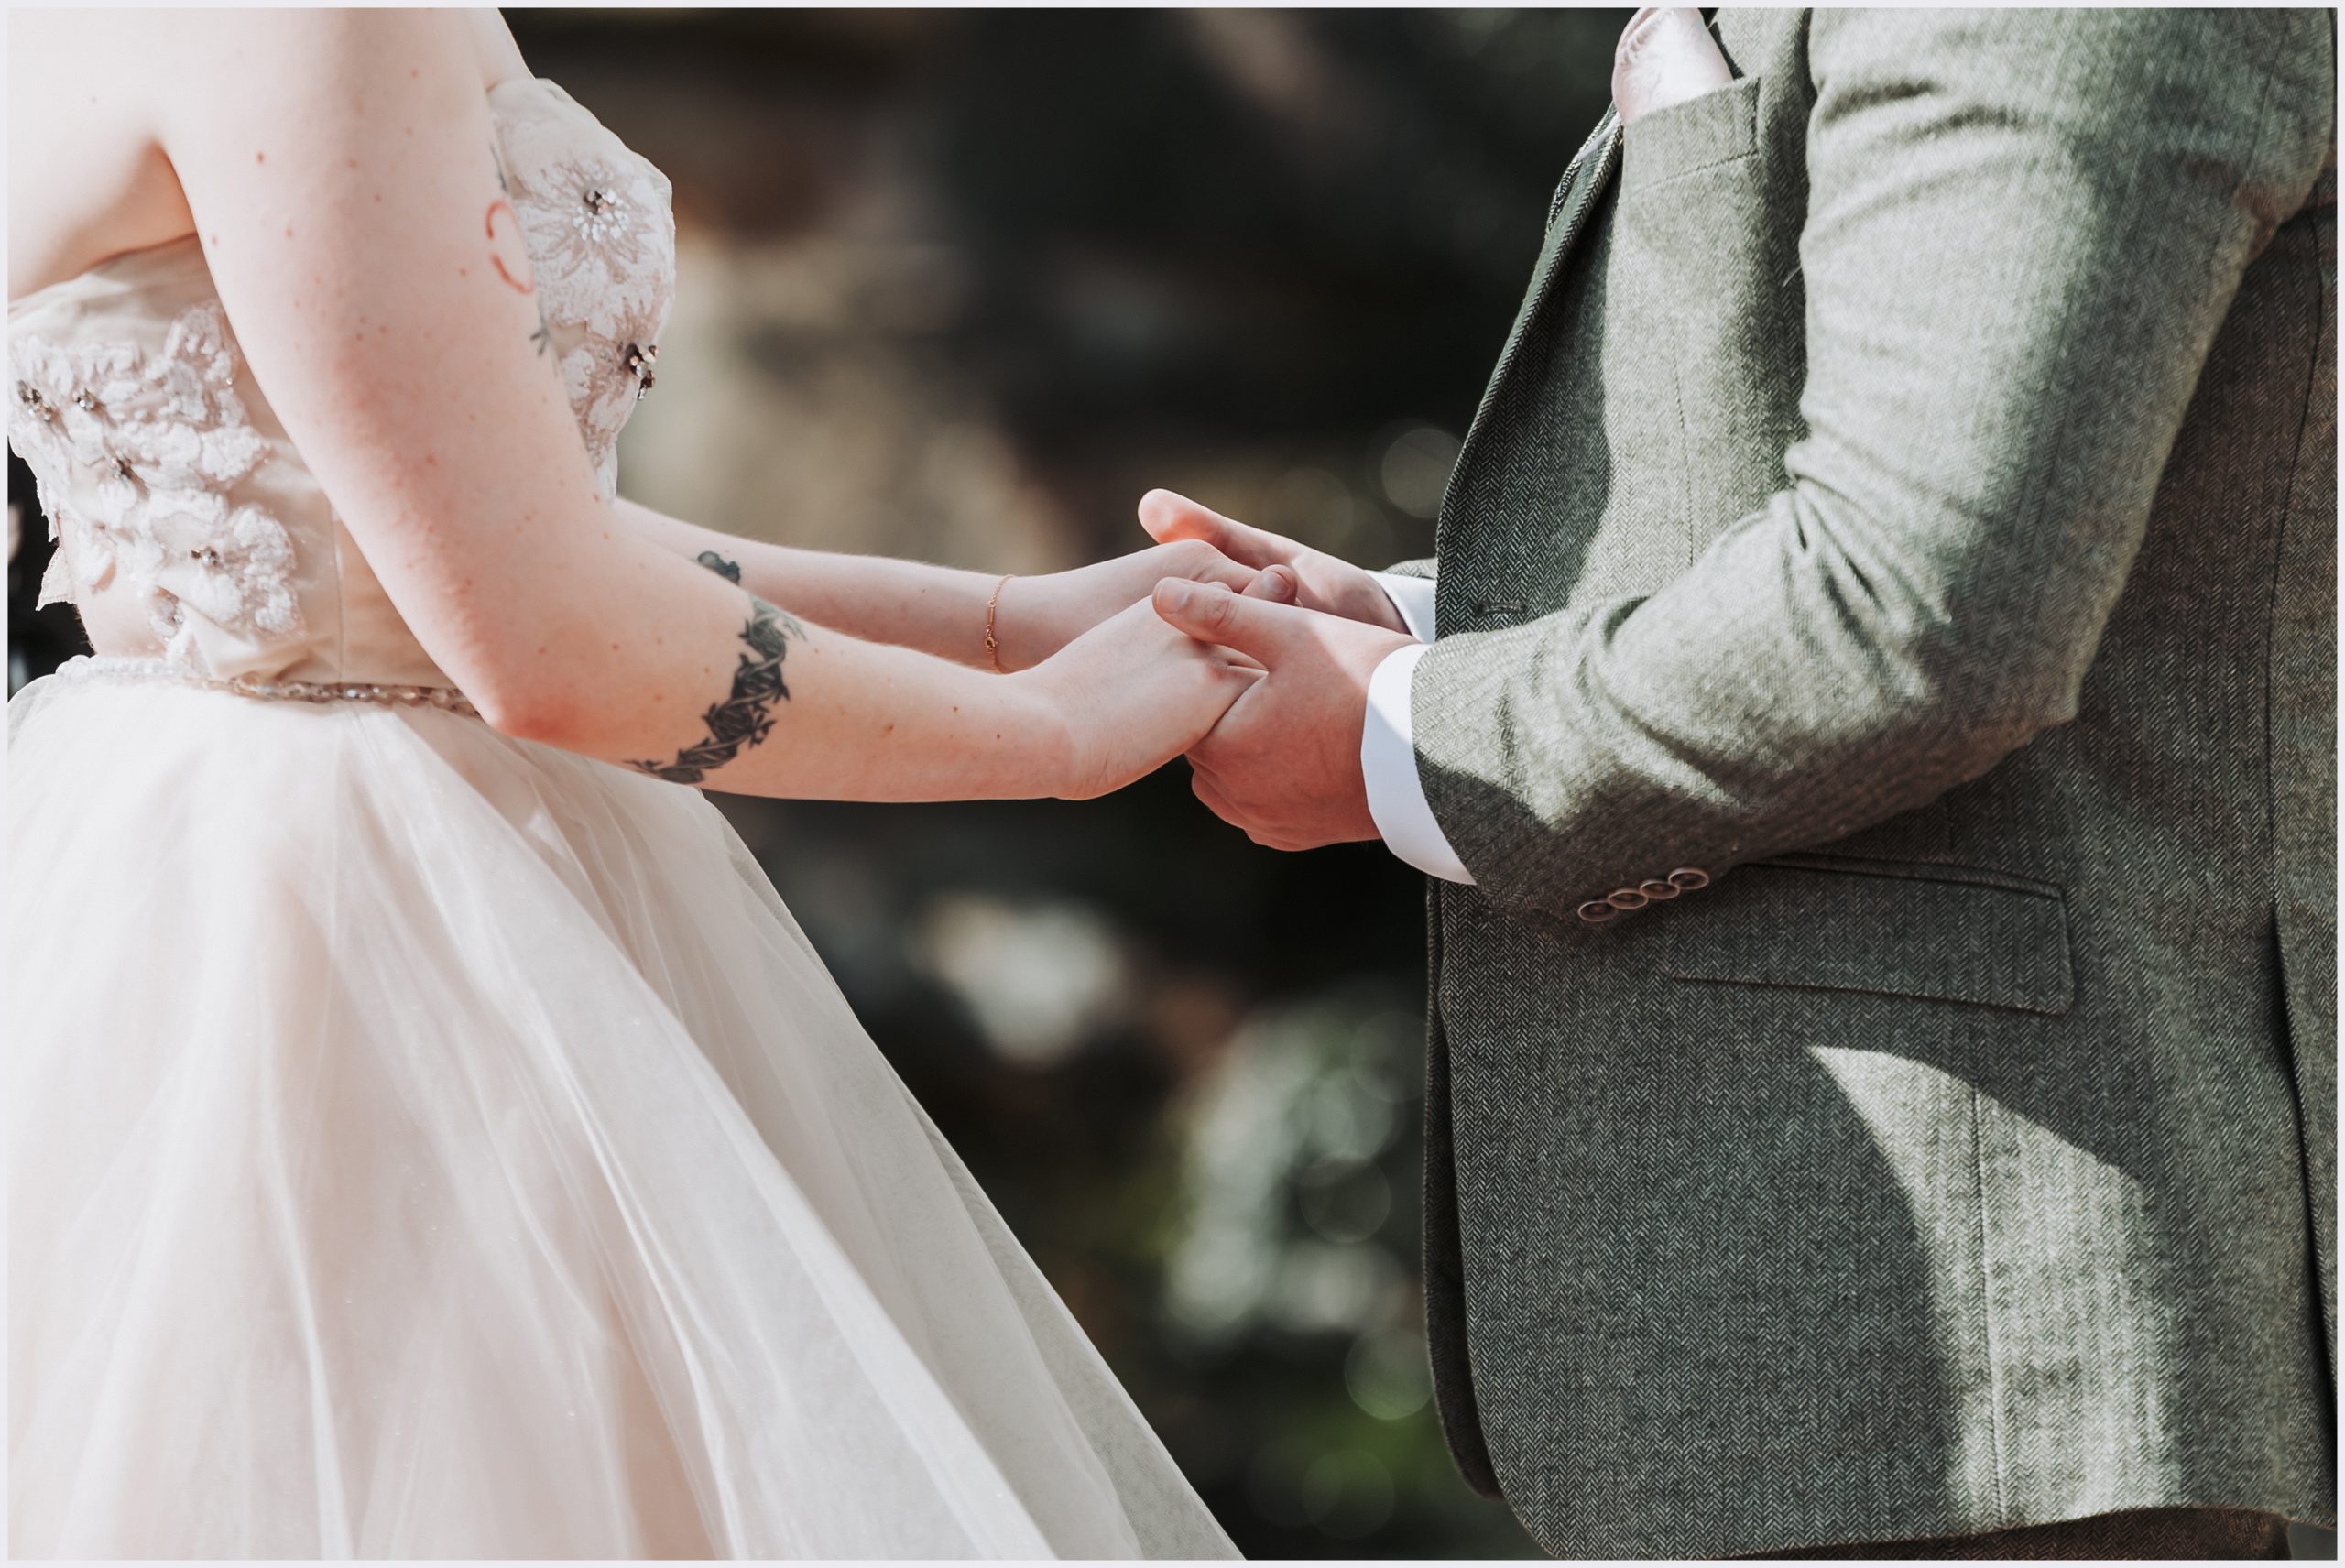 A close up of the bride and groom's holding hands during the wedding ceremony.  Image captured by helena Jayne Photography